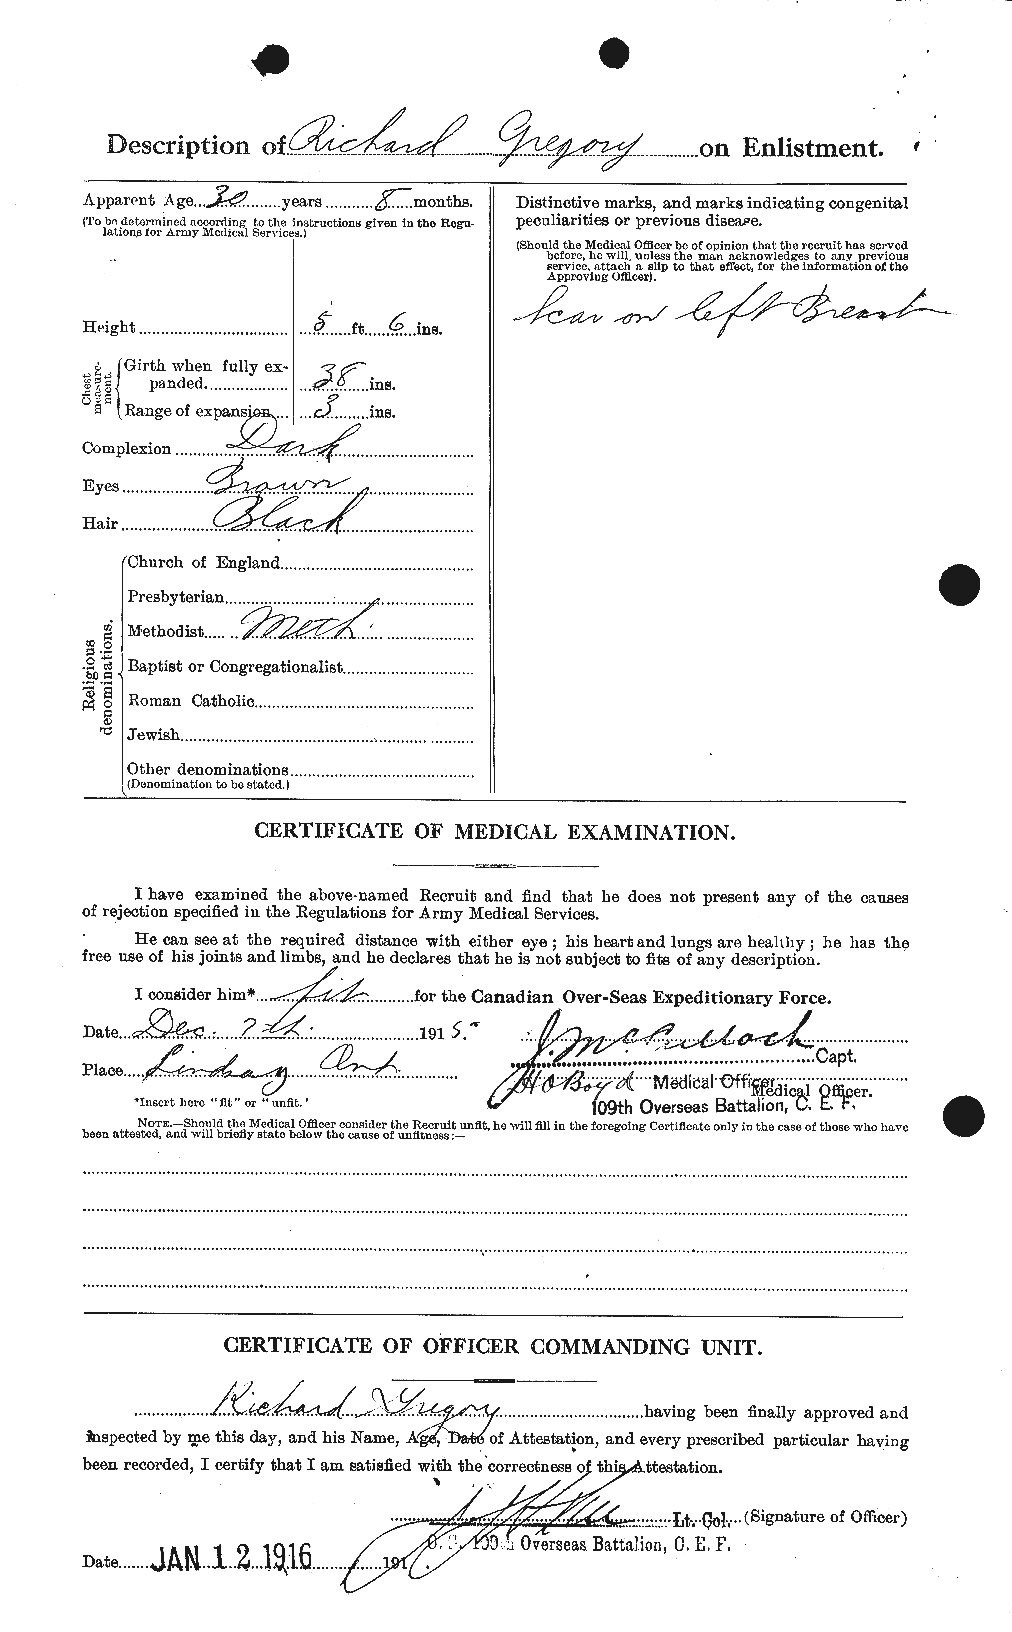 Personnel Records of the First World War - CEF 363019b